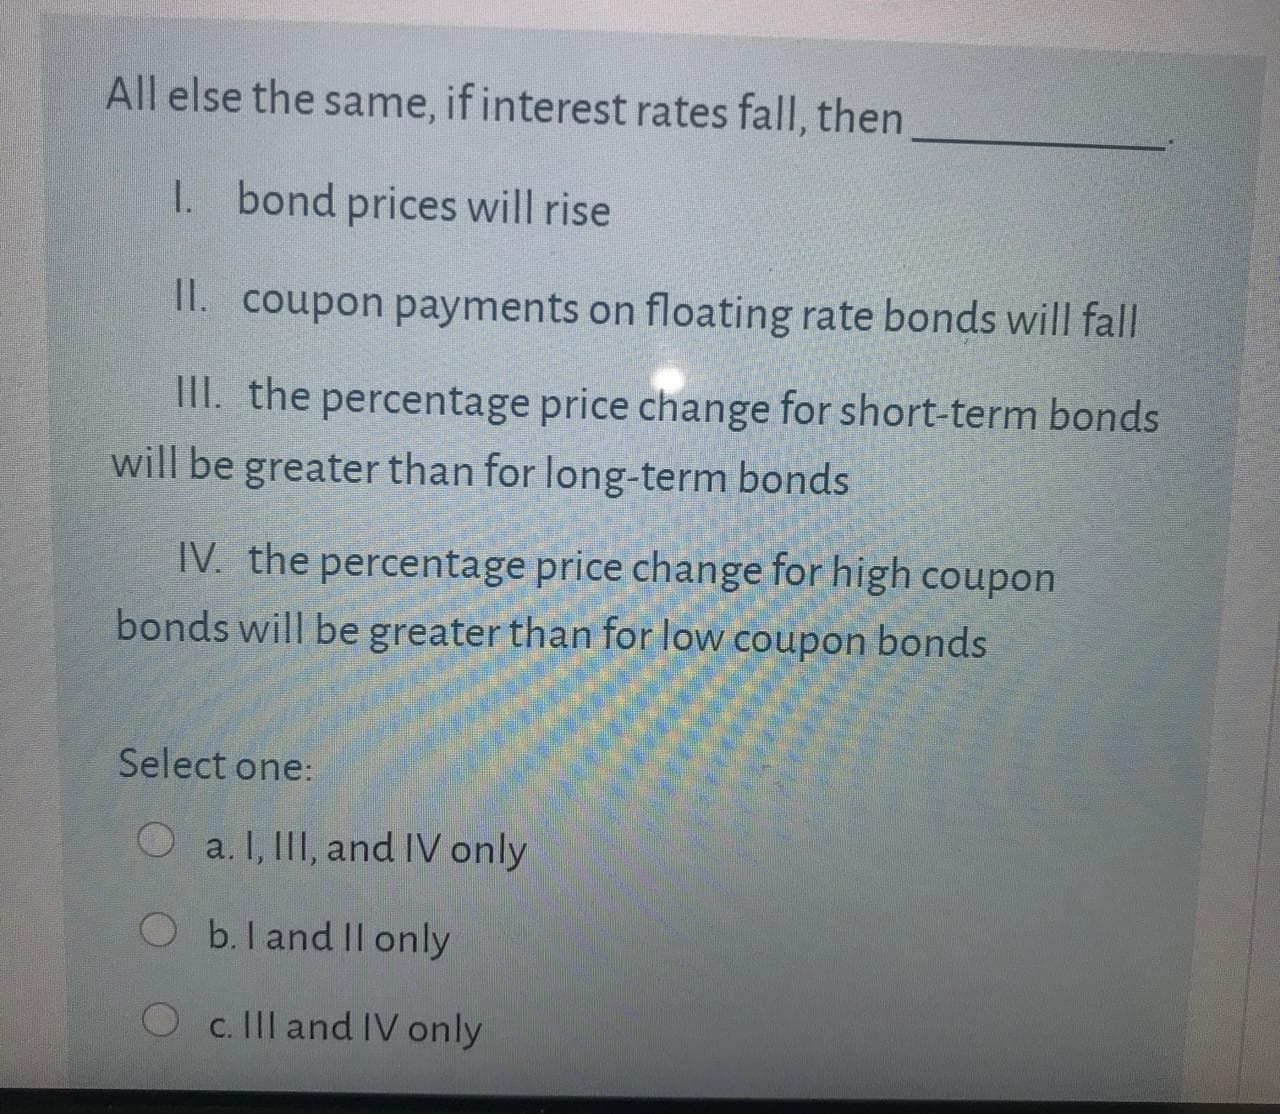 All else the same, if interest rates fall, then
1. bond prices will rise
II. coupon payments on floating rate bonds will fall
III. the percentage price change for short-term bonds
will be greater than for long-term bonds
IV. the percentage price change for high coupon
bonds will be greater than for low coupon bonds
Select one:
Oa. I, III, and IV only
Ob.land Il only
Oc. Il and IV only
